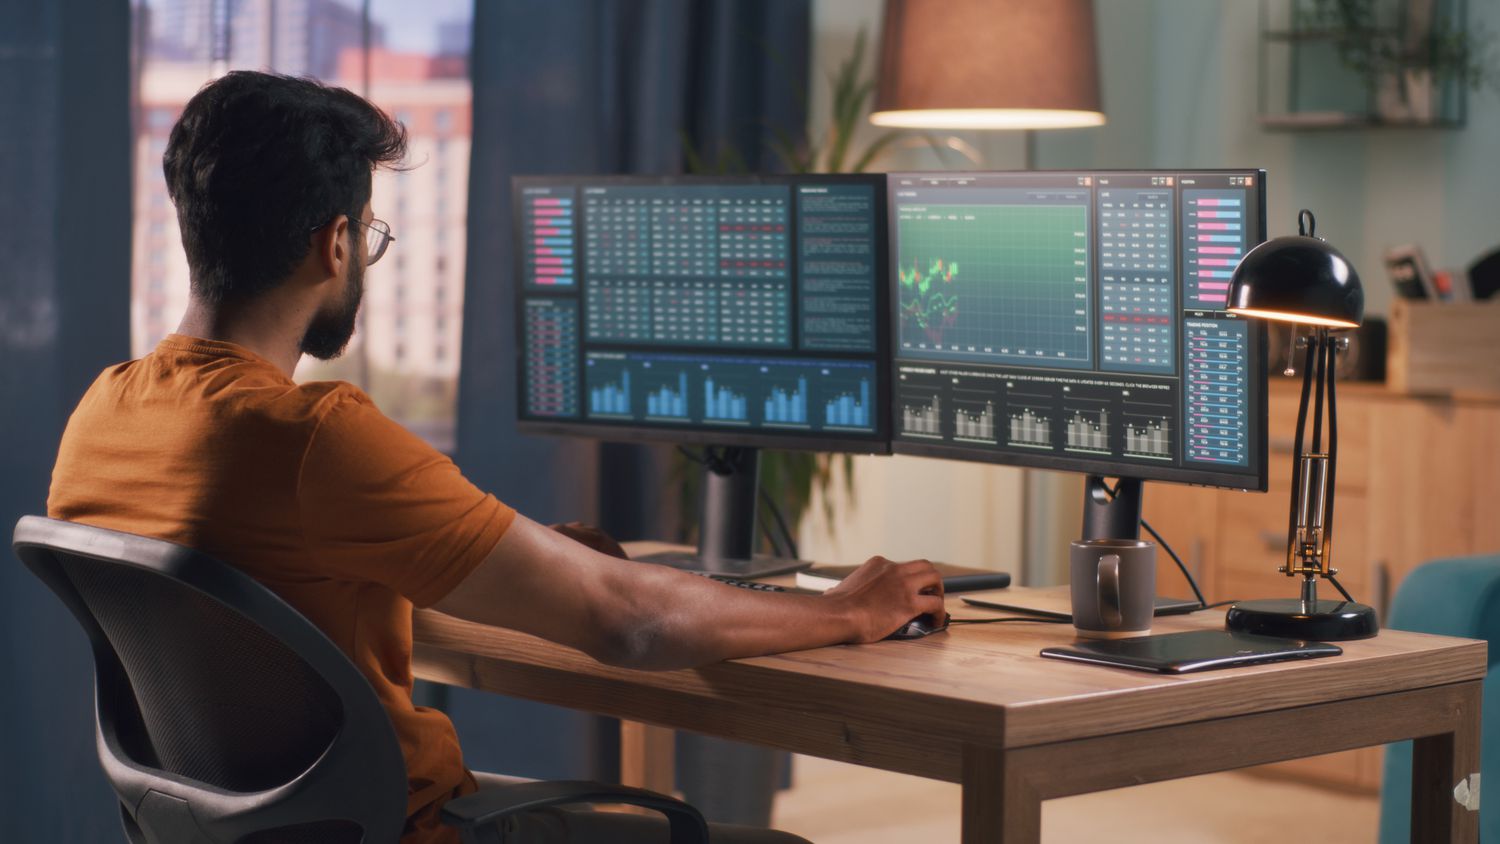 Person seated at a desk, looking at computer monitors showing market trading data